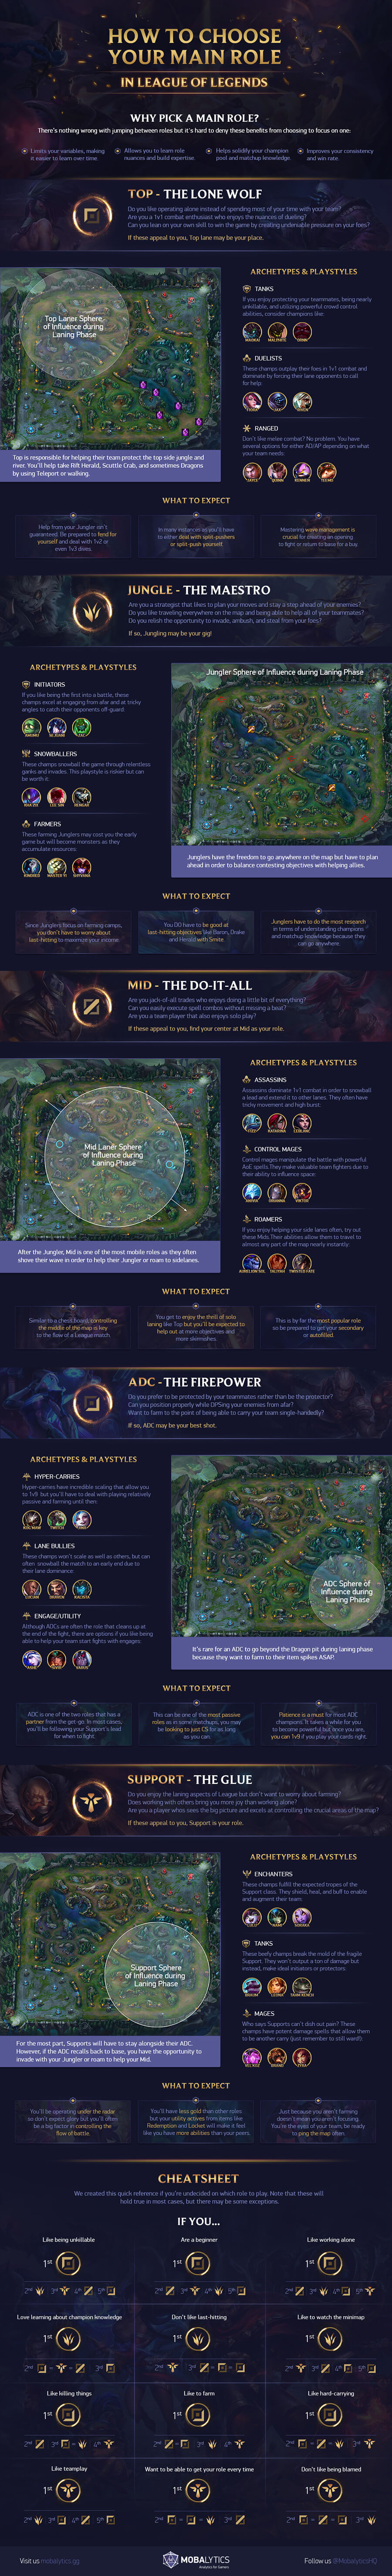 How to Choose Your Main Role in League of Legends (infographic)